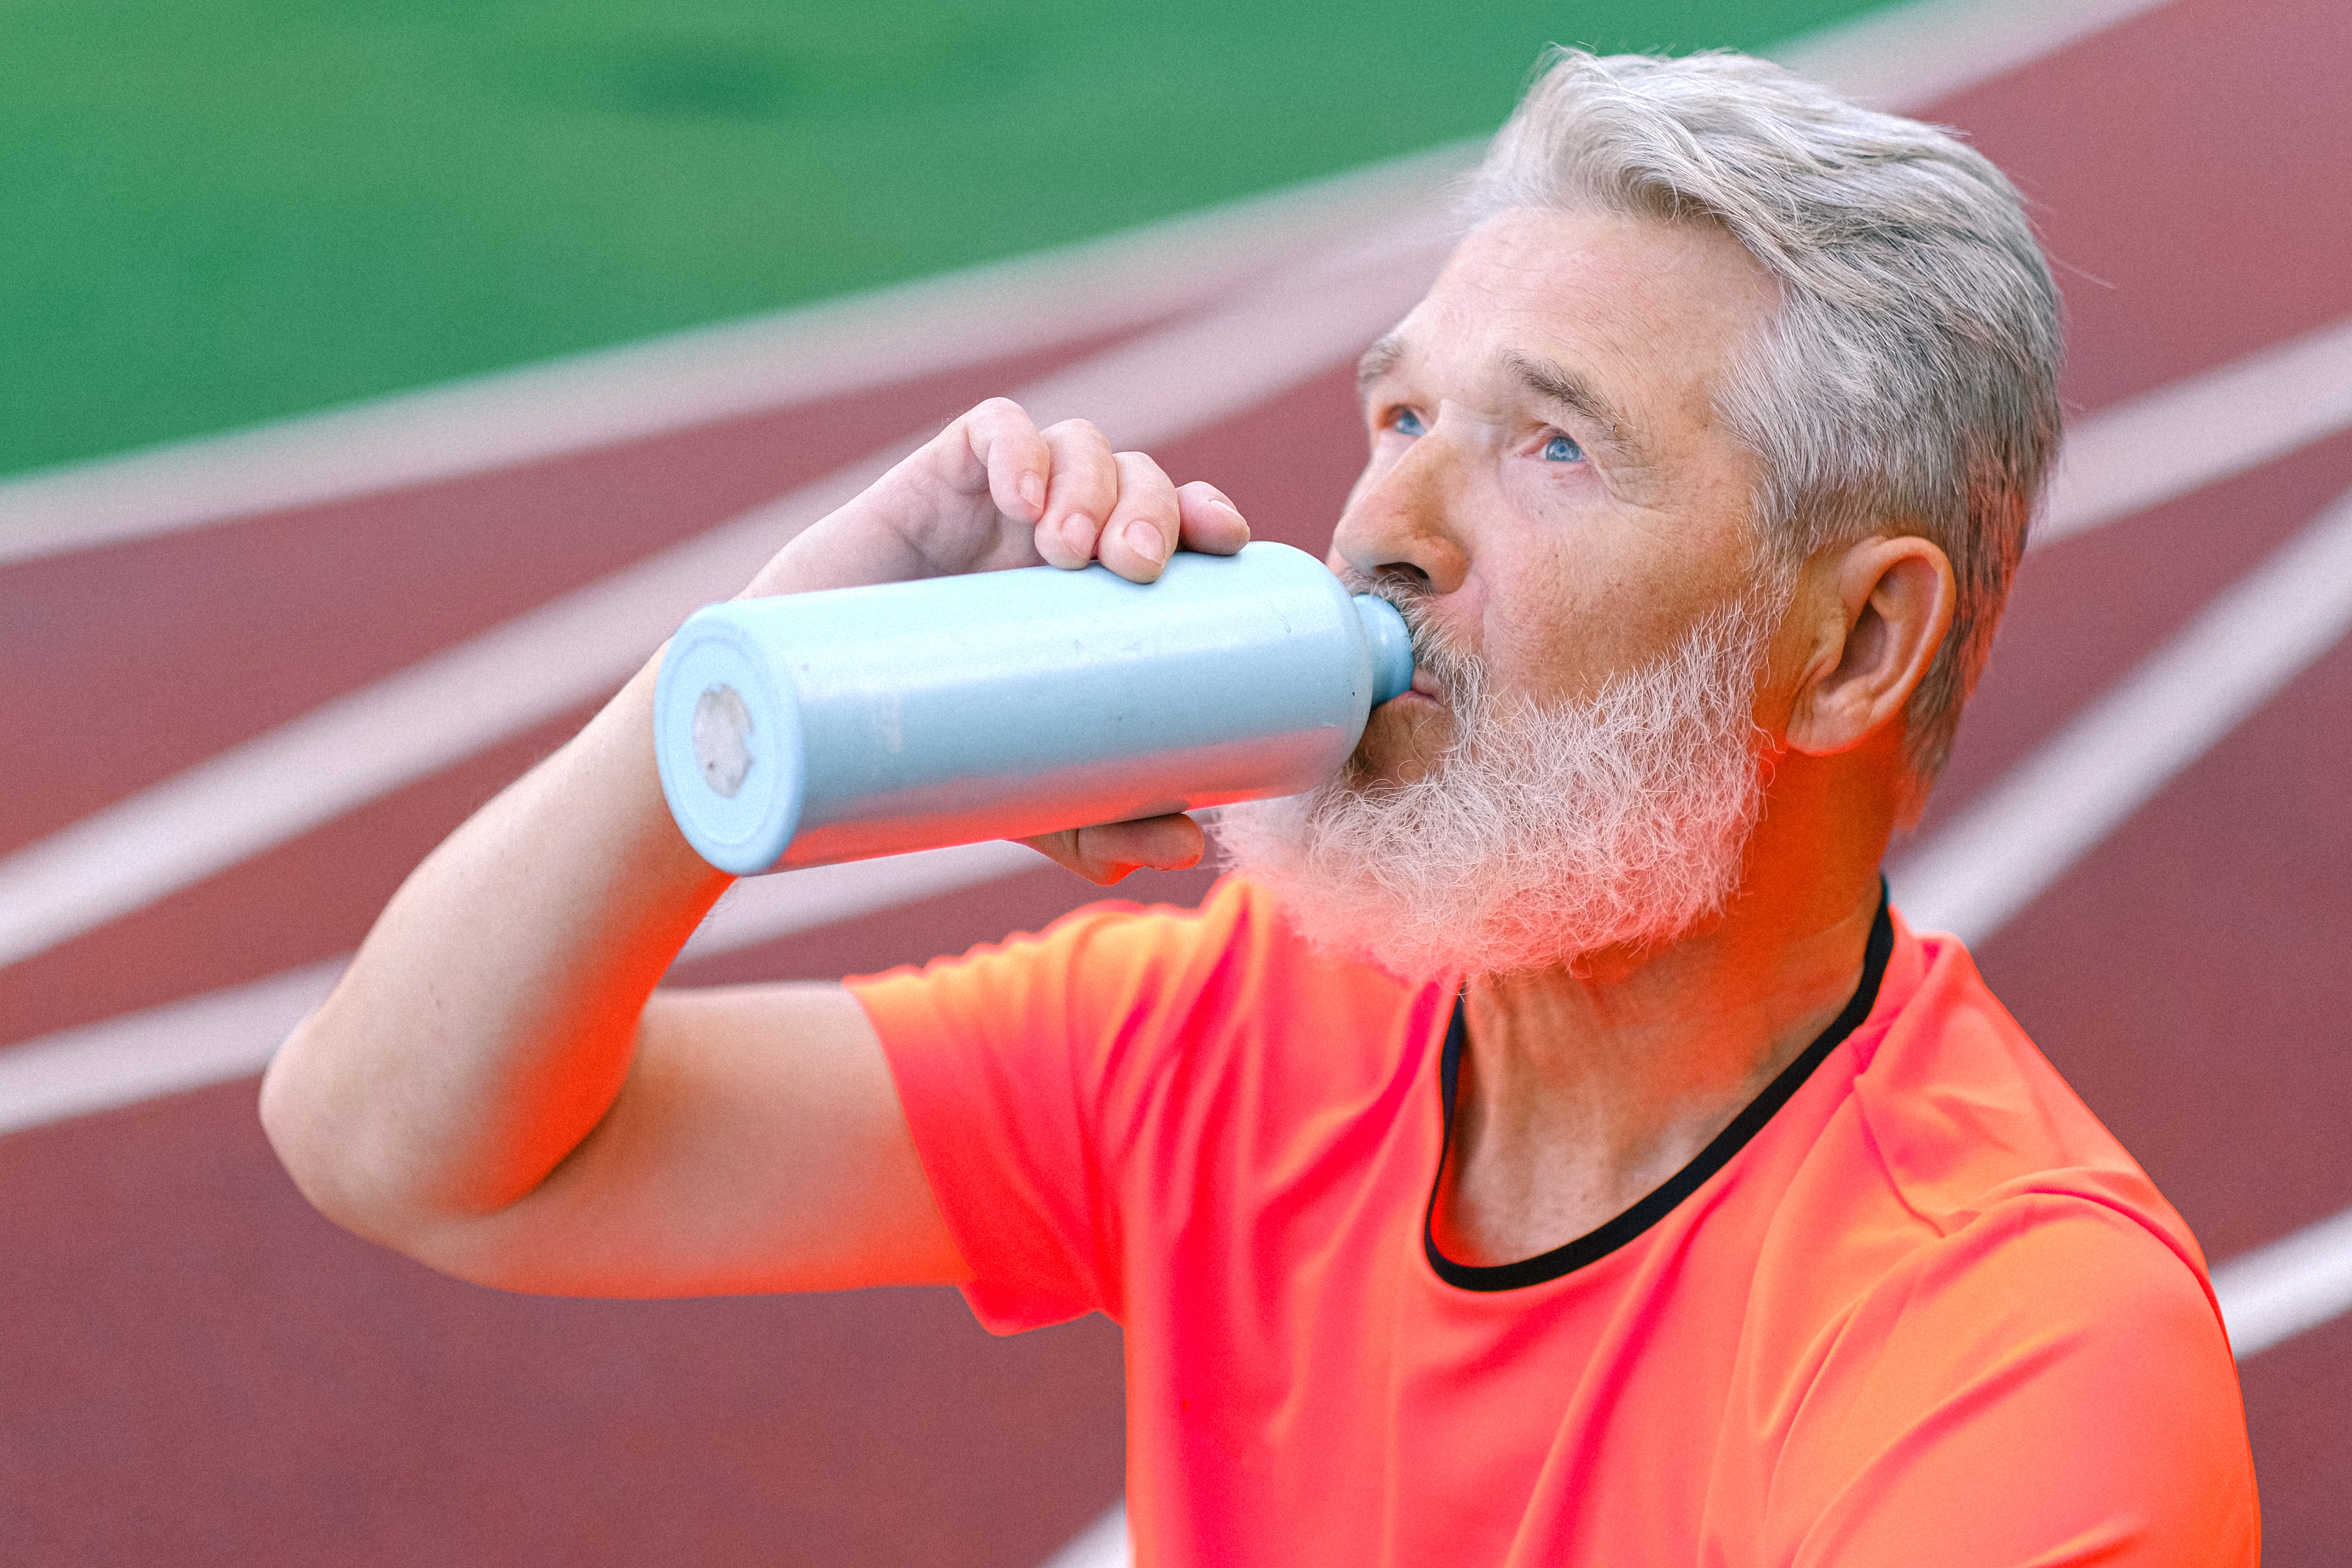 Runner drinking water Featured Image How Do You Know if You’re Drinking Too Much or Not Enough Water?